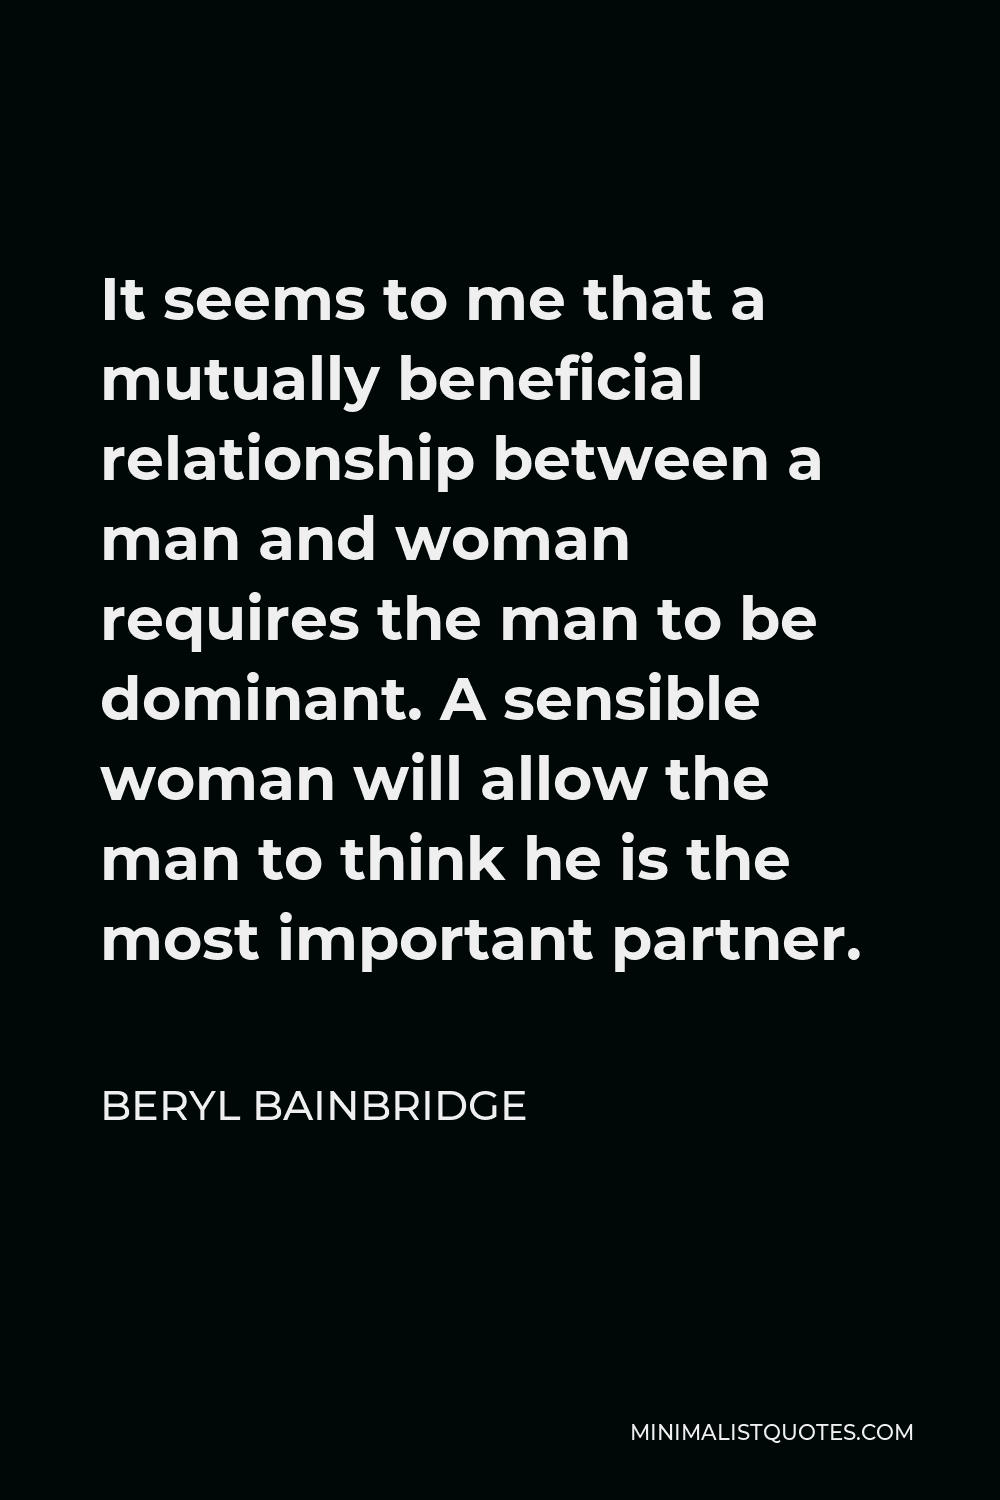 Beryl Bainbridge Quote - It seems to me that a mutually beneficial relationship between a man and woman requires the man to be dominant. A sensible woman will allow the man to think he is the most important partner.